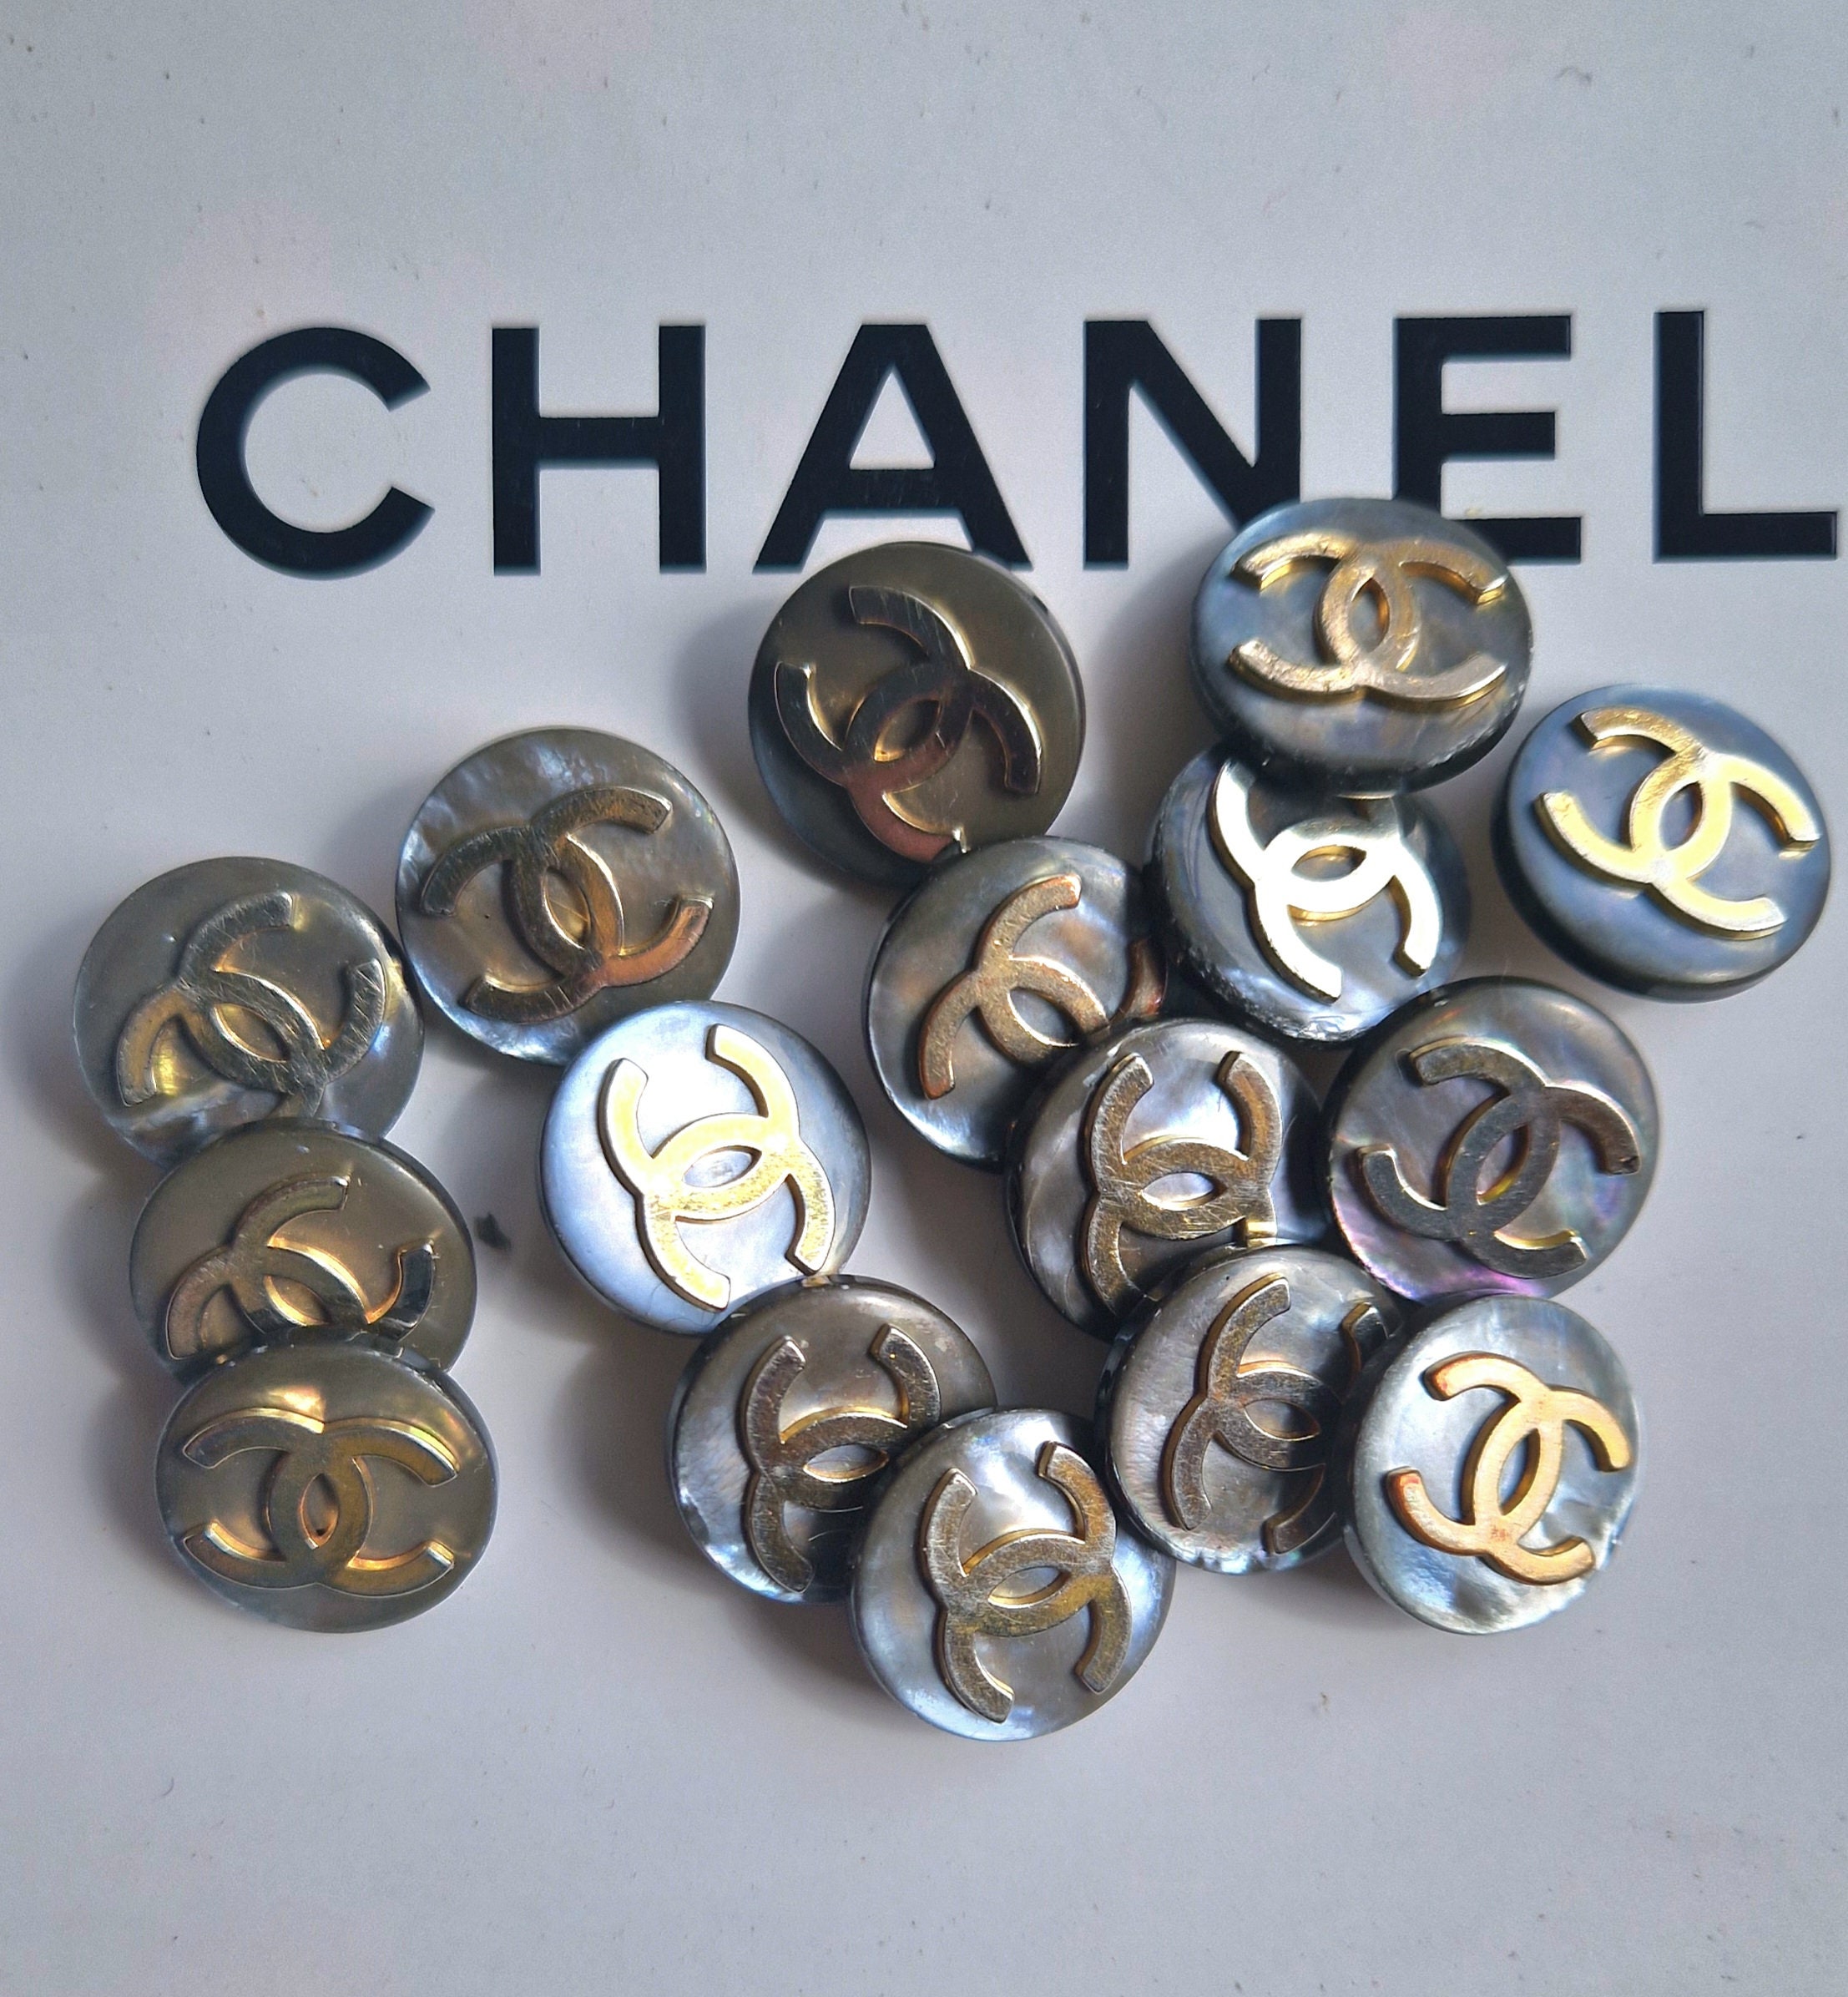 CHANEL Brooch Pin Badge Oval CC Leather COCO Gold GP B16B authentic